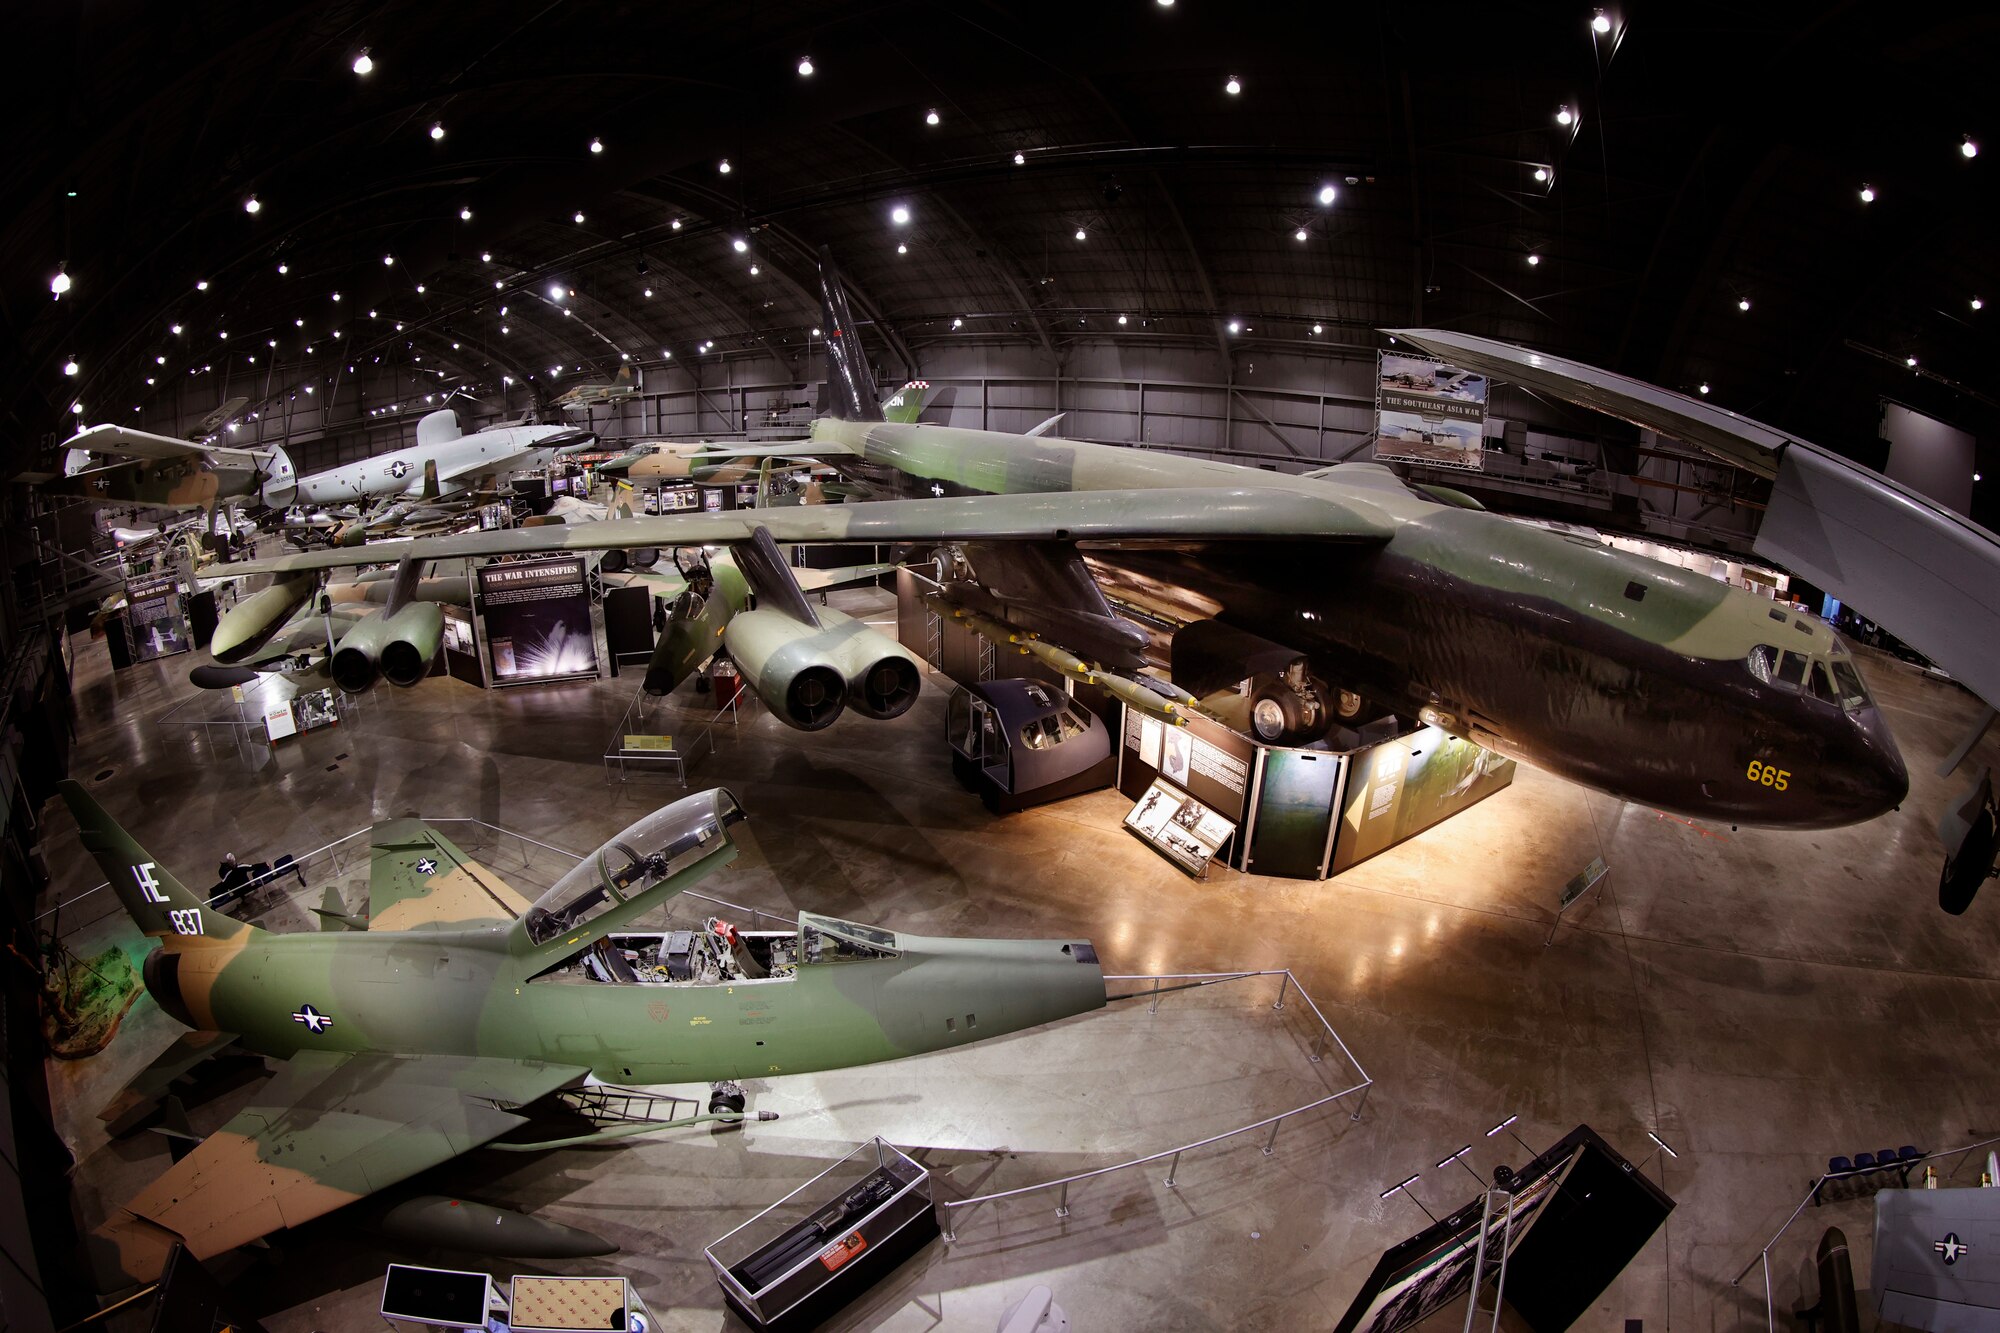 Boeing B-52D Stratofortress on display in the National Museum of the U.S. Air Force Southeast Asia War Gallery.